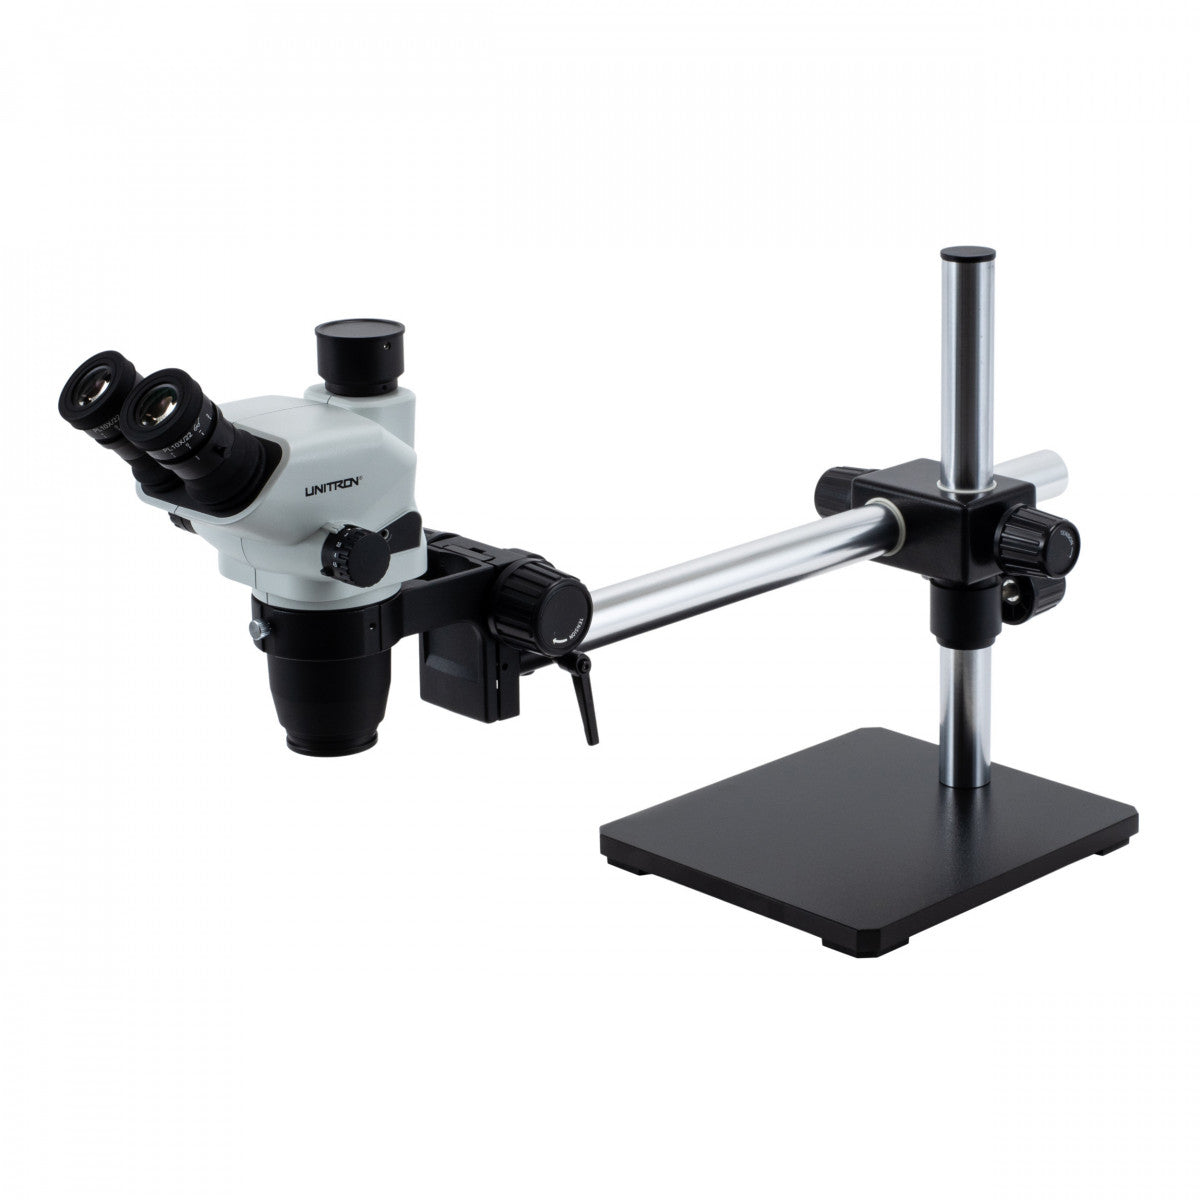 Unitron Z645 Zoom Stereo Microscope on Boom Stand | Industrial part inspection - microscopemarketplace